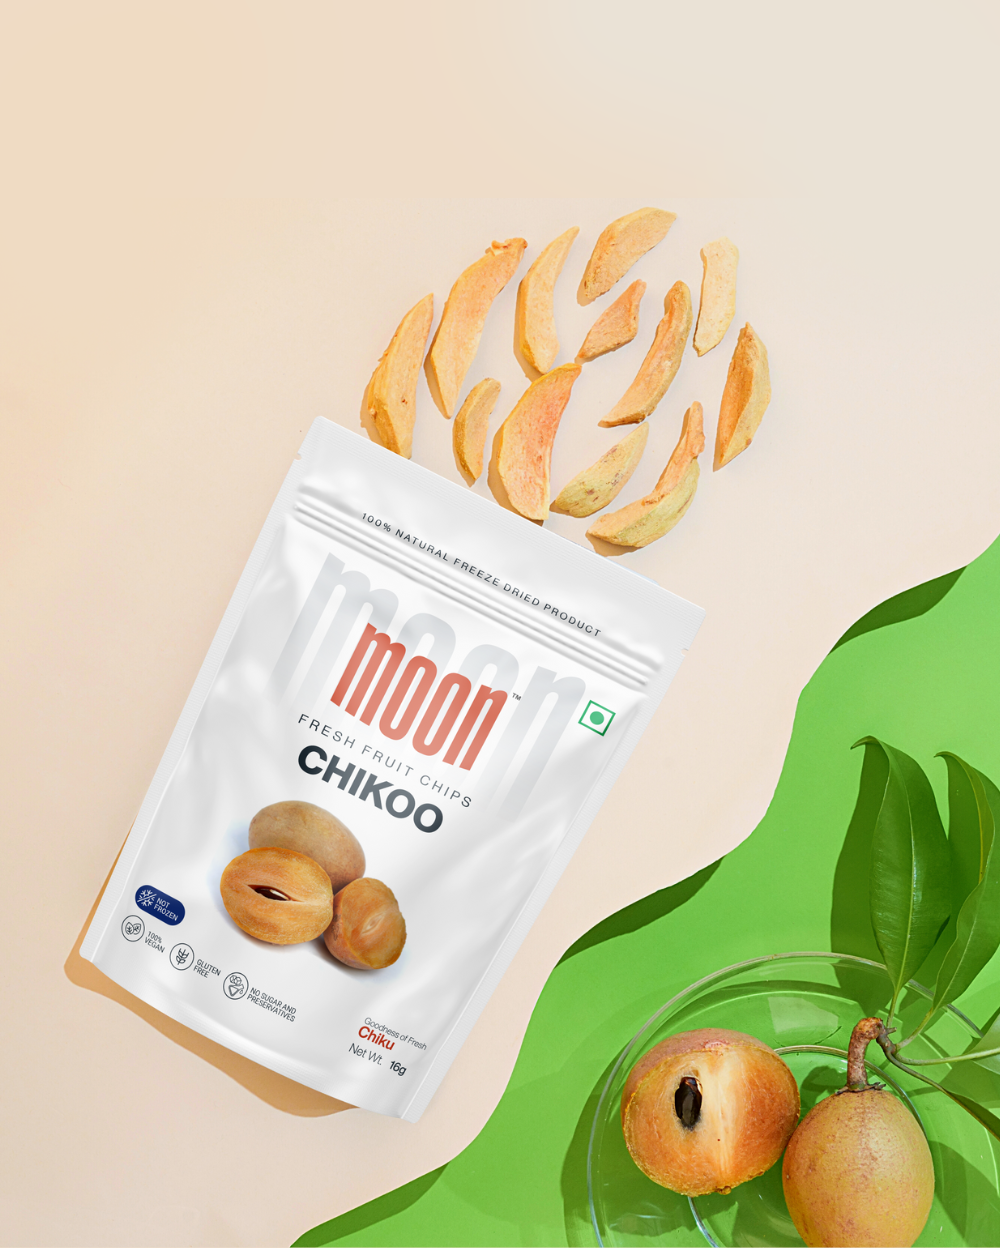 A bag of Moon Freeze Dried Chiku chips next to a bag of Moon Freeze Dried Chiku, Themoonstoreindia.